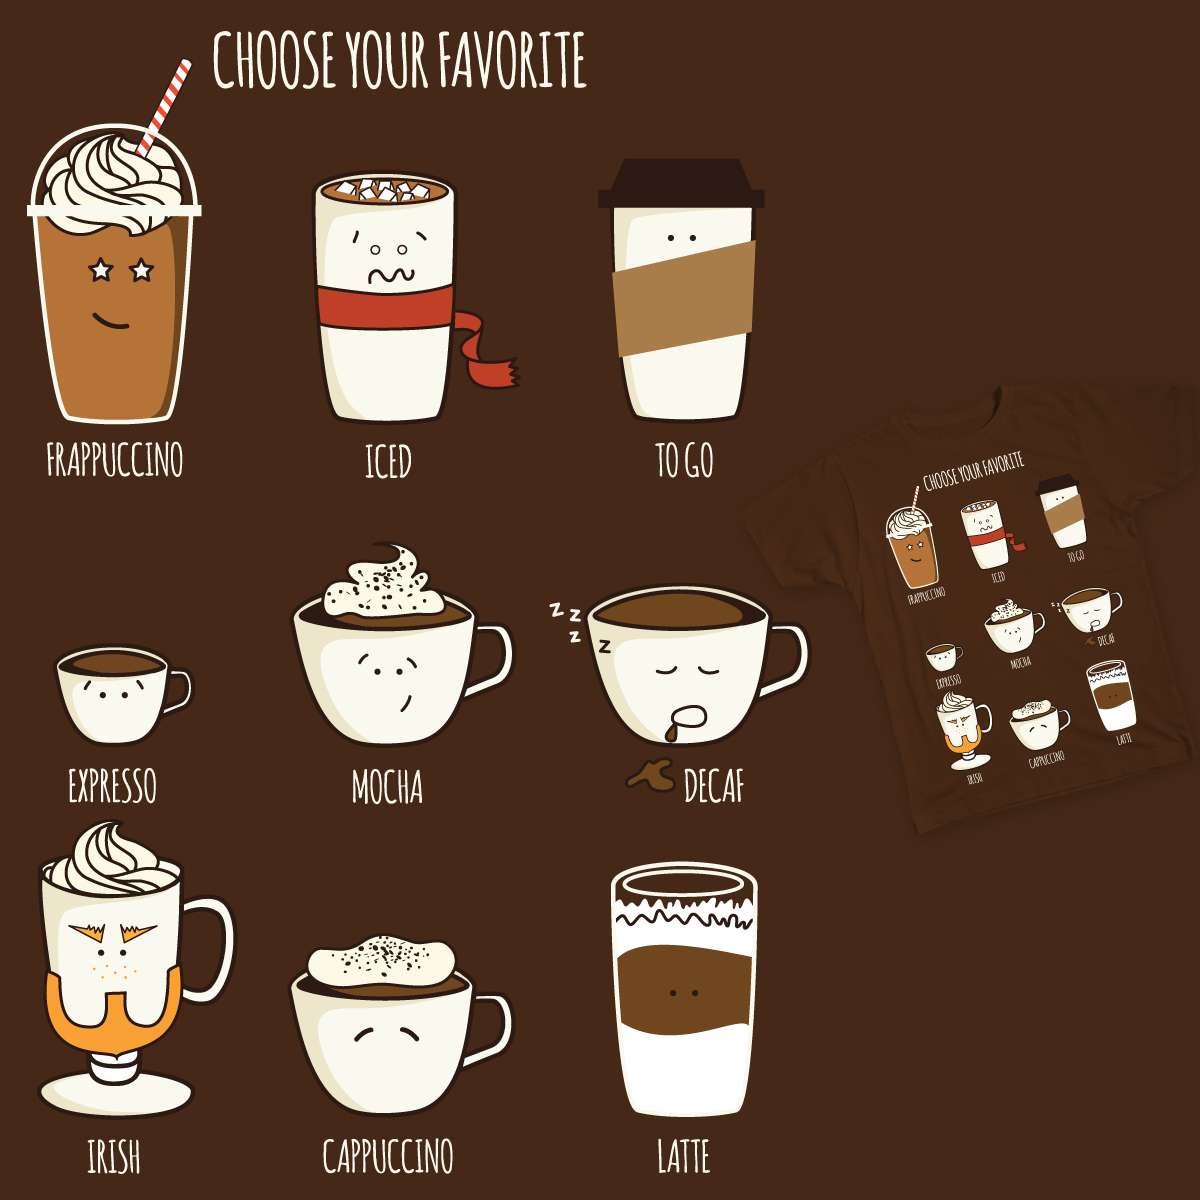 Score Coffee types by Nbubble on Threadless